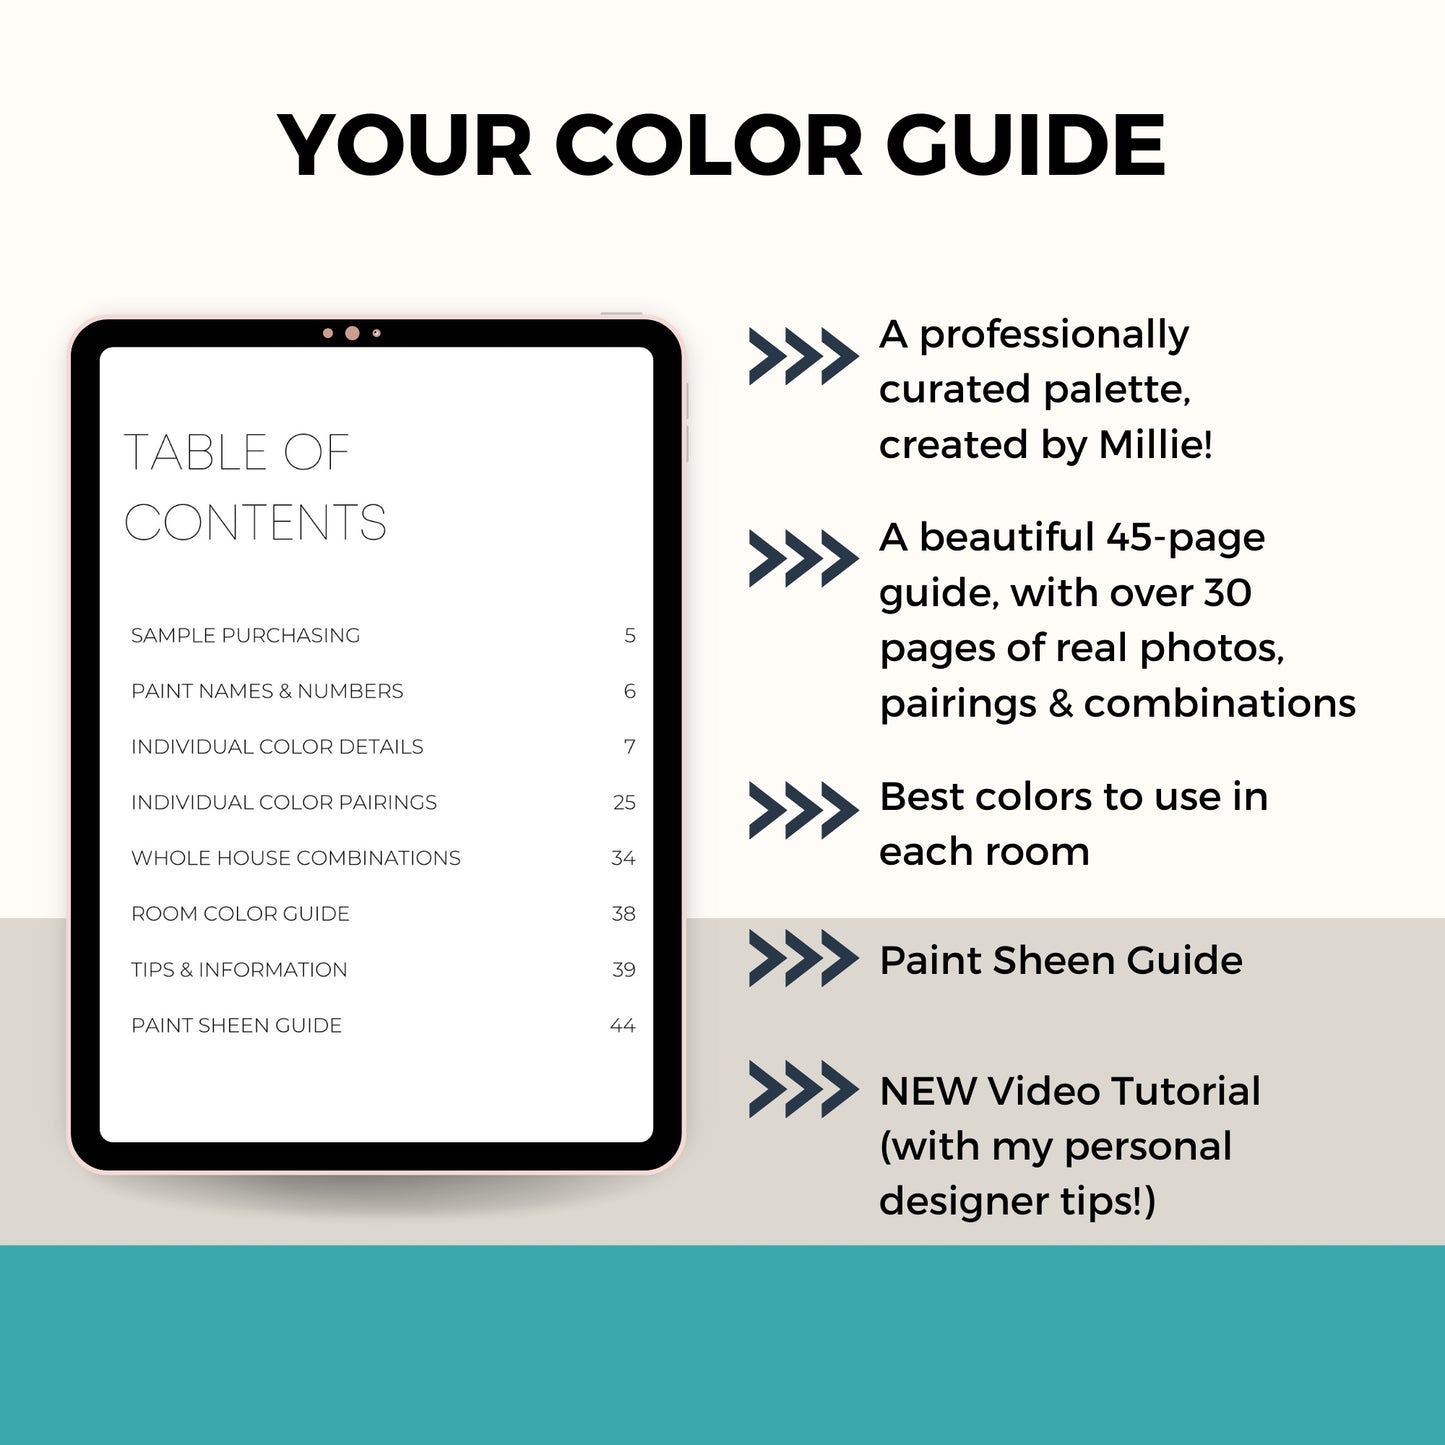 Coastal Sherwin Williams Paint Palette, Interior Paint Colors for Home, Cool Grays, Coastal Colors, In the Navy